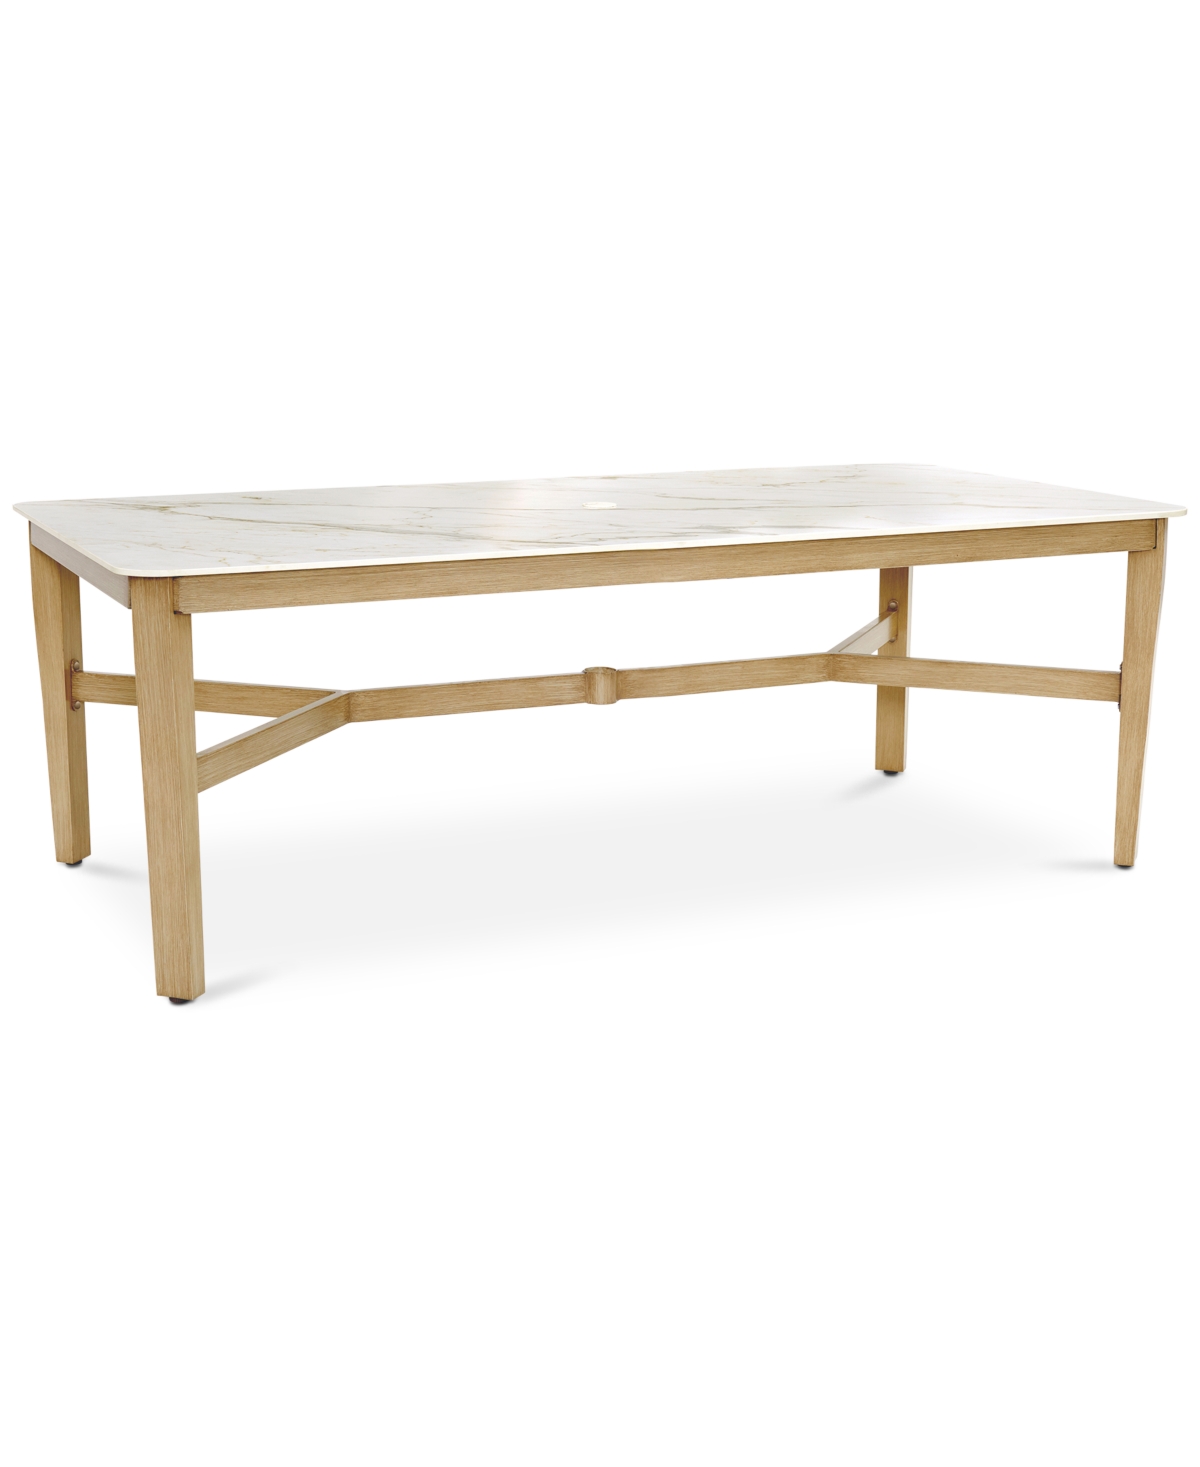 Agio Reid Outdoor 84" X 42" Rectangle Porcelain Top Dining Table, Created For Macy's In Lt. Beige